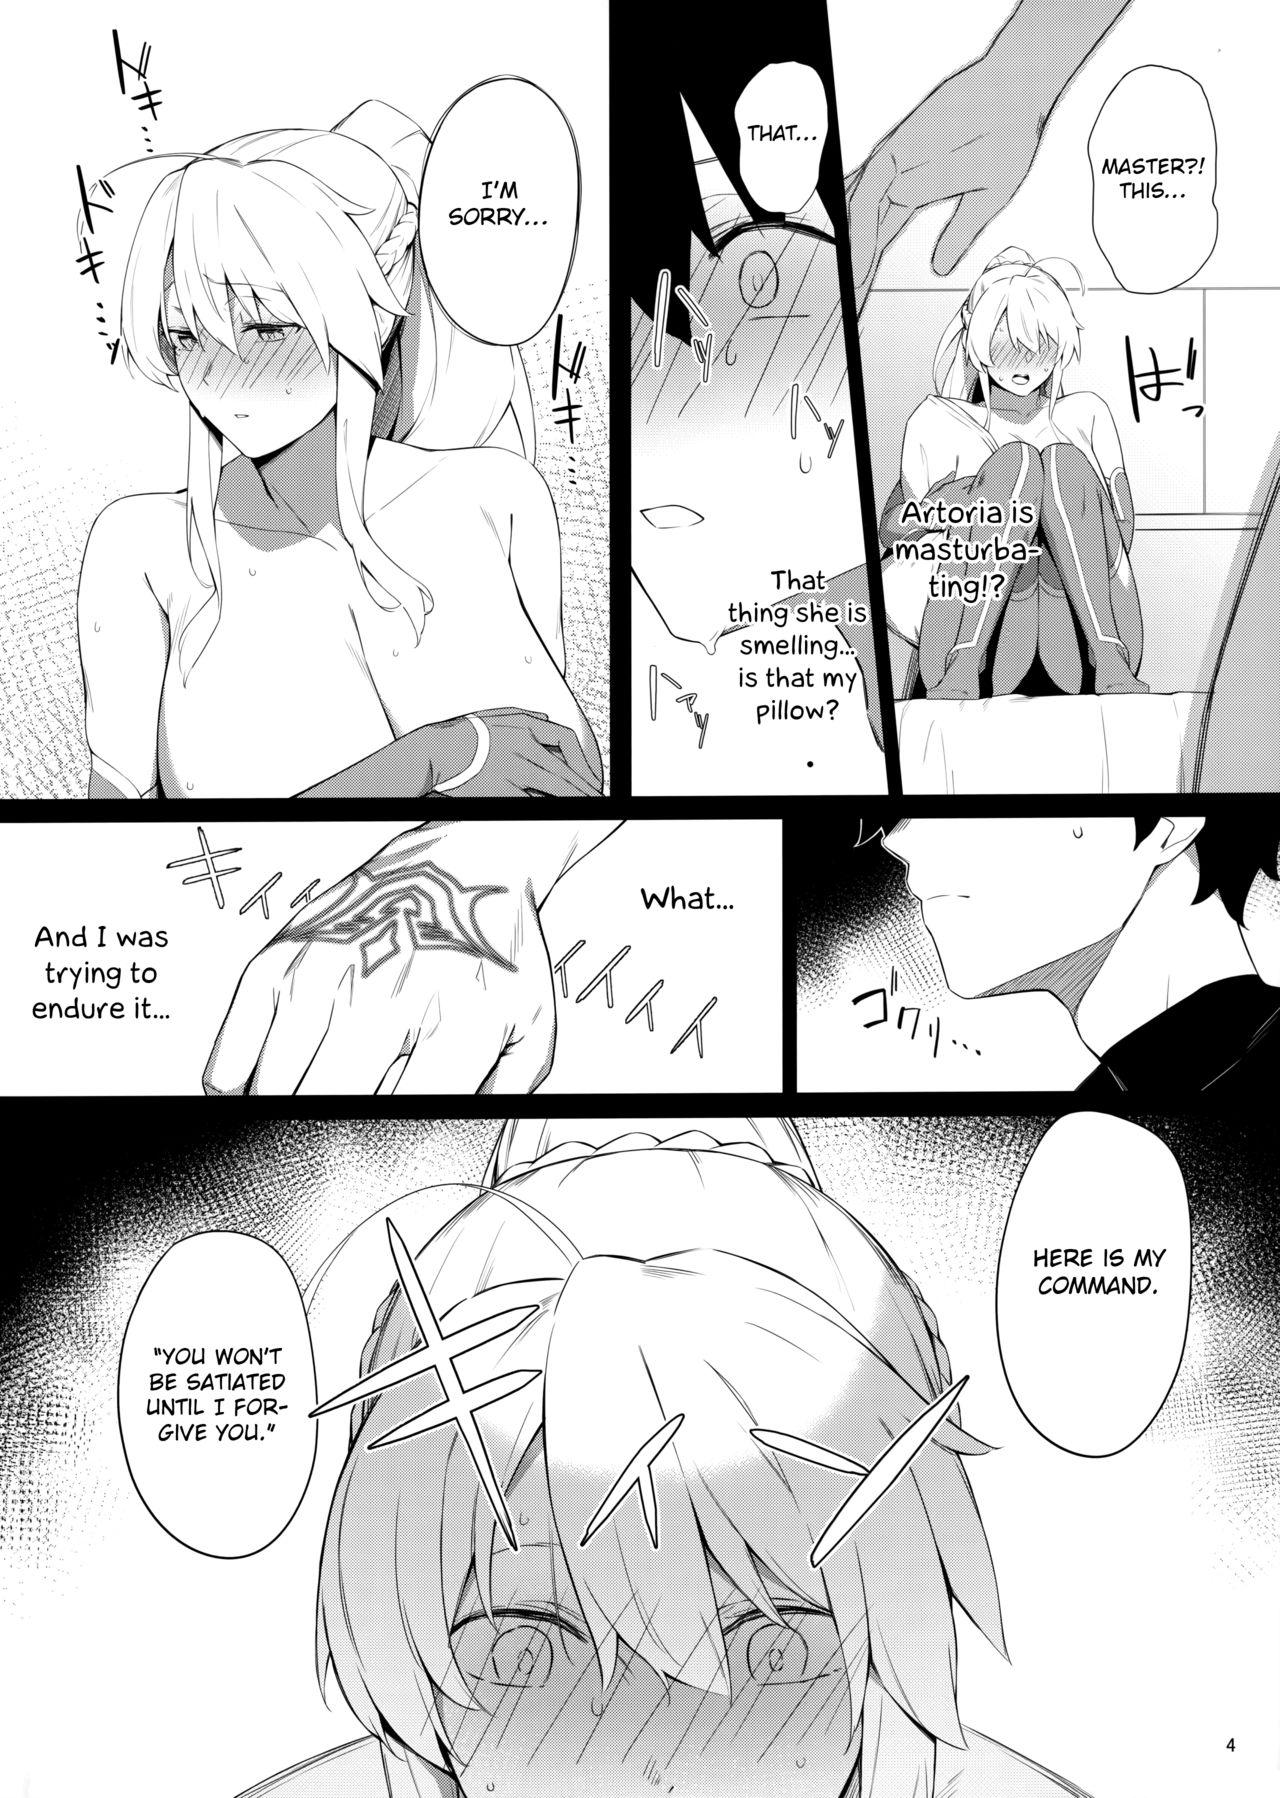 Safado OUT OF CONTROL - Fate grand order Highschool - Page 3